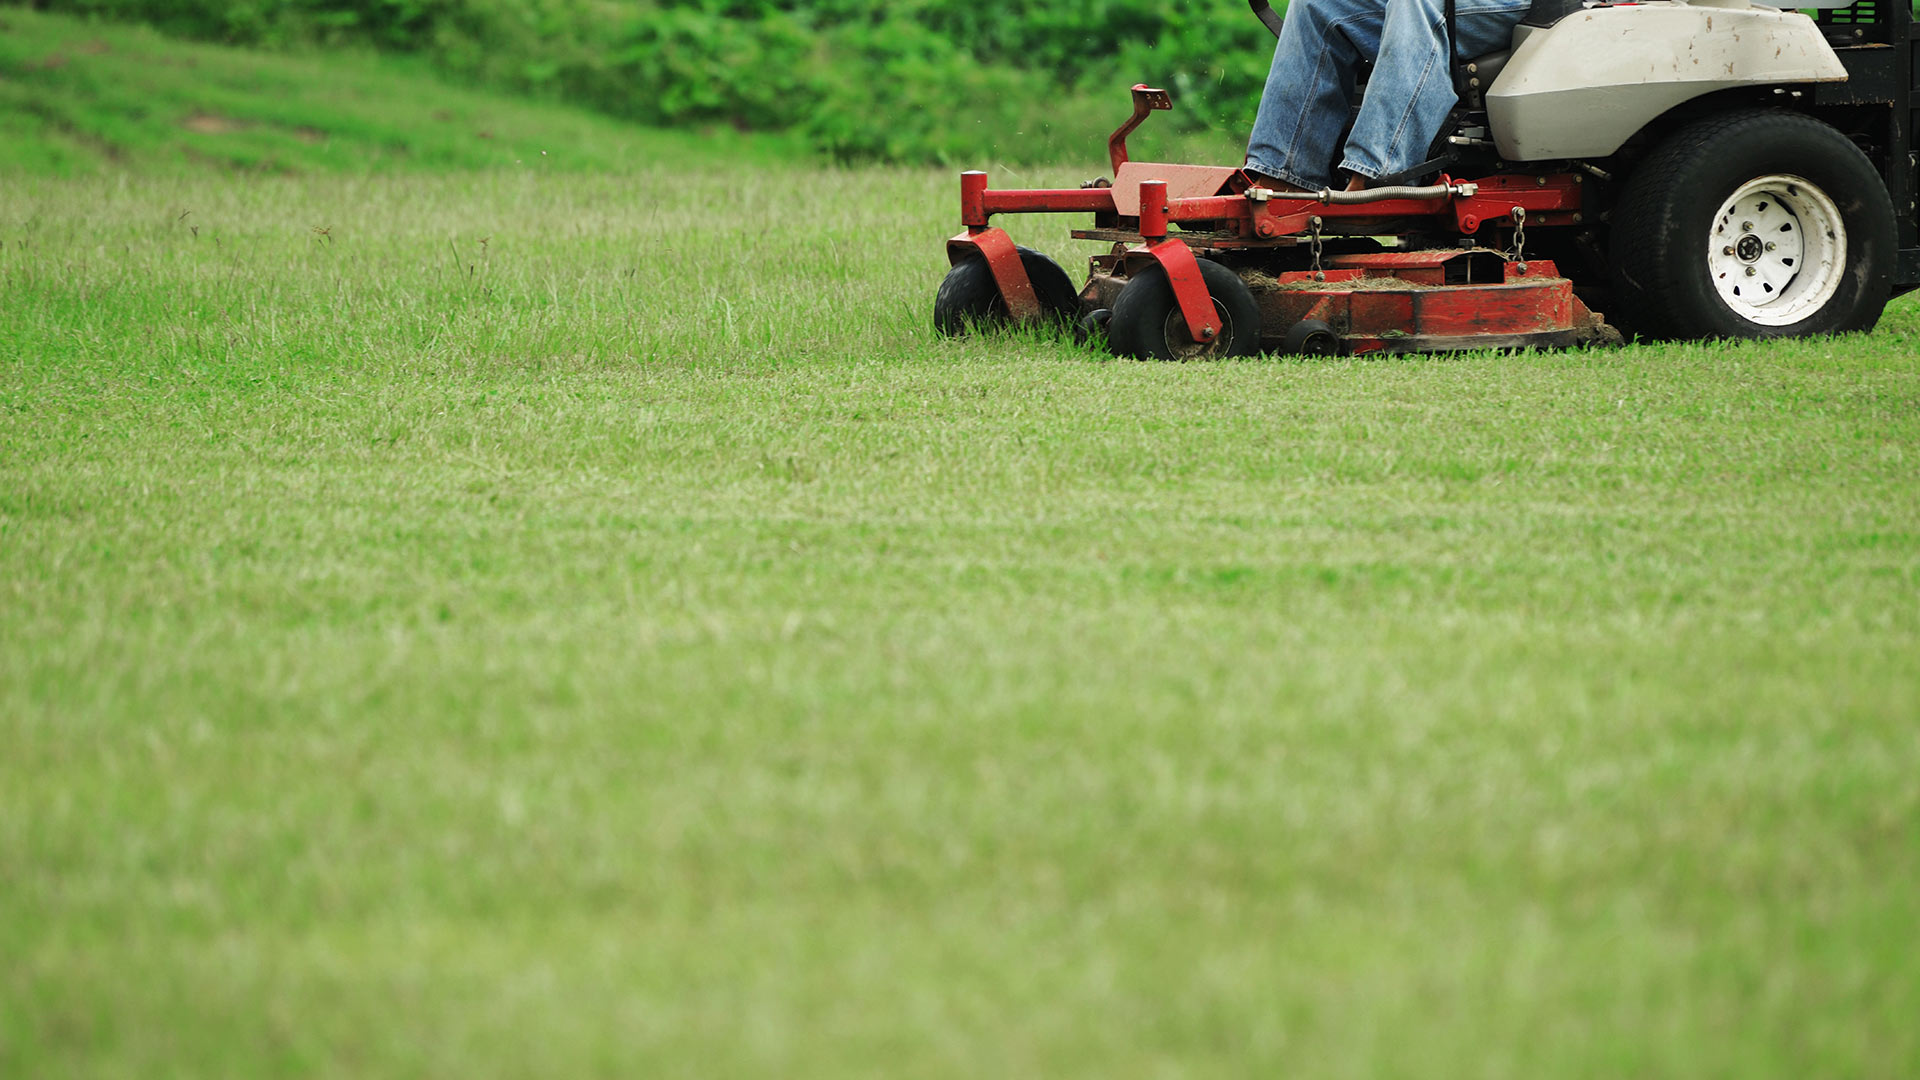 3 Questions to Ask a Lawn Mowing Company Before Hiring Them